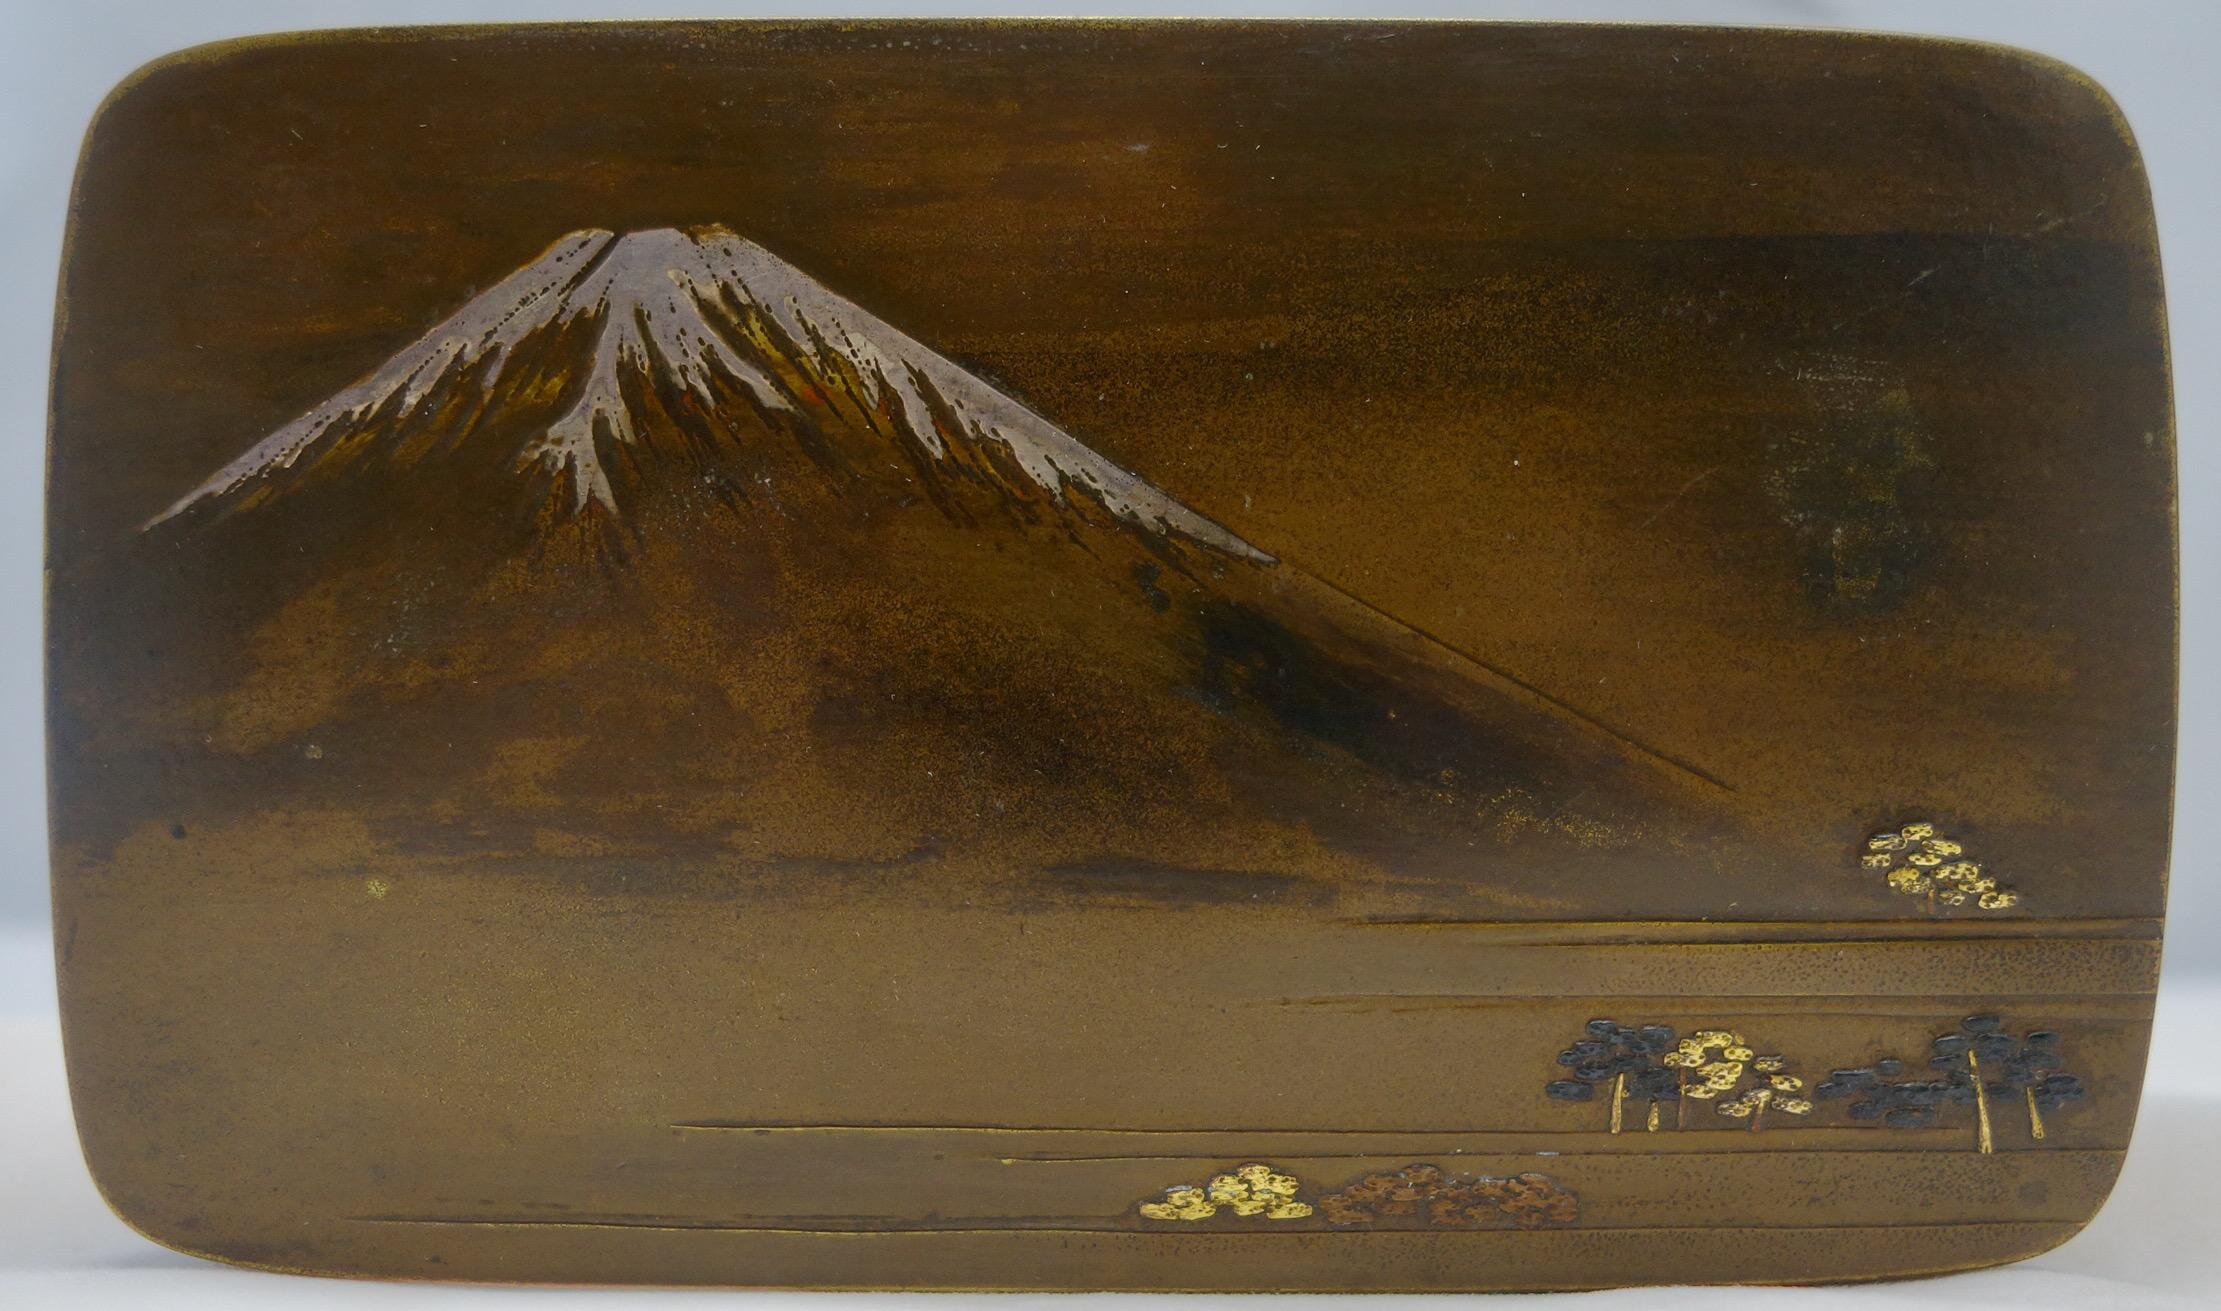 Japanese mixed metal box with the view of Mount Fuji executed in silver, and covered with birds and plants overlay all around. The box is from Meiji period circa 1890s, and it is 5 3/4